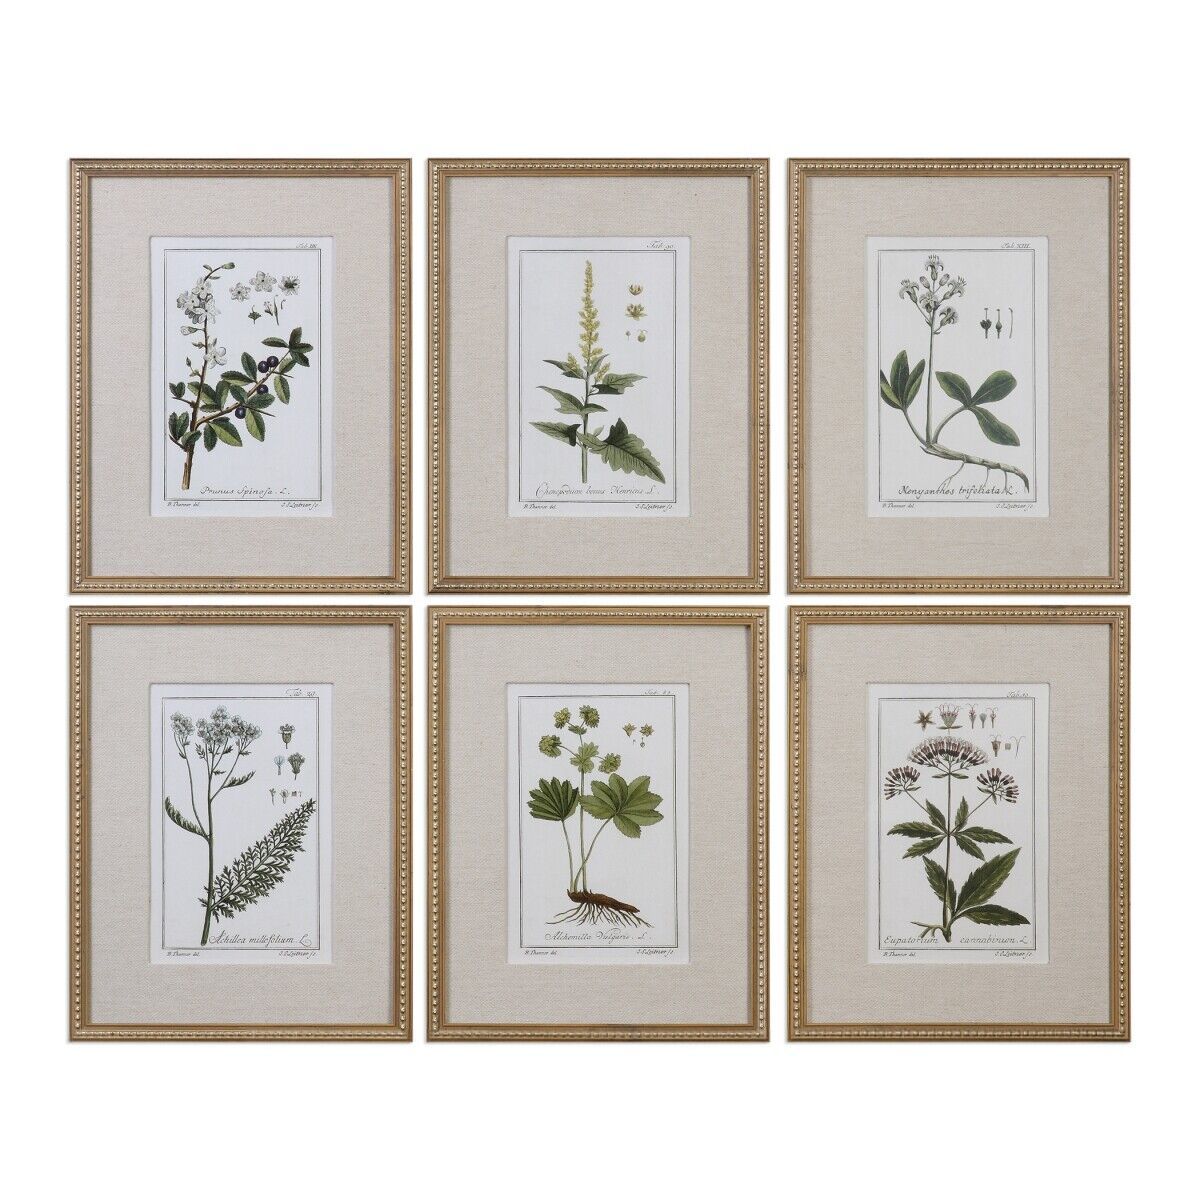 Primary image for 212 Main 33651 Green Floral Botanical Study Prints  Set of 6